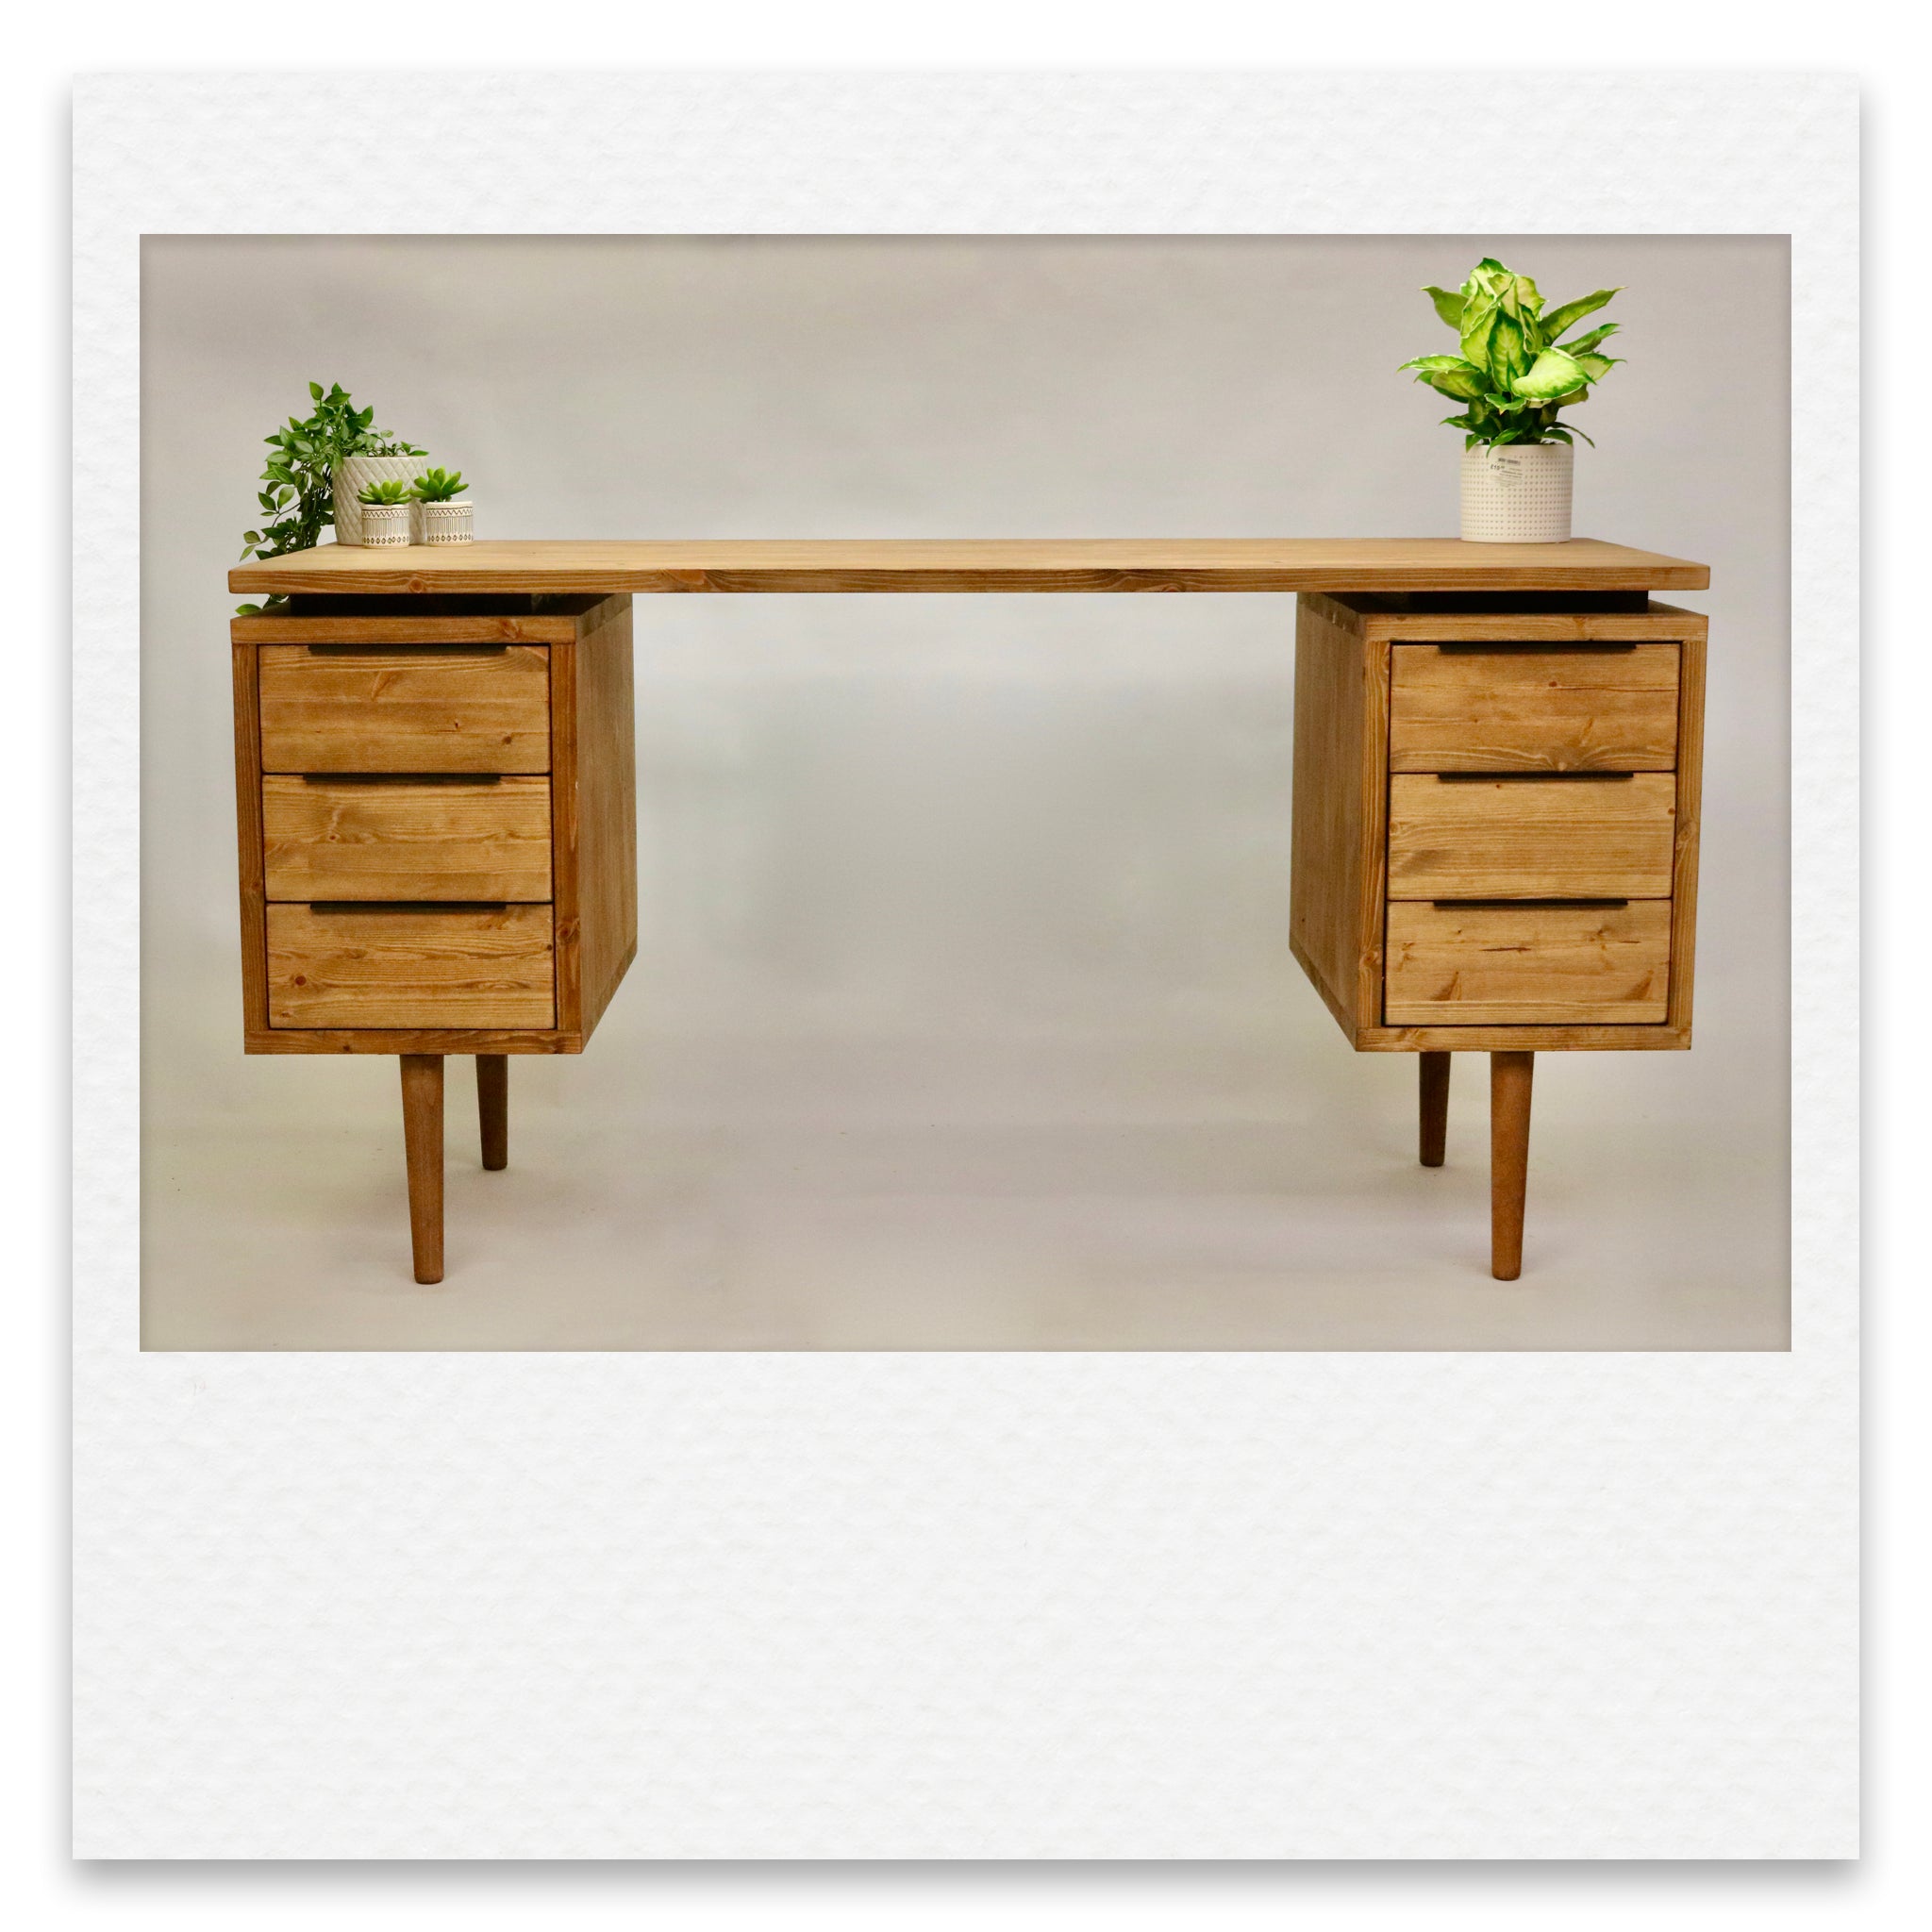 Large Executive Wooden Desk with Three Pedestal Drawers